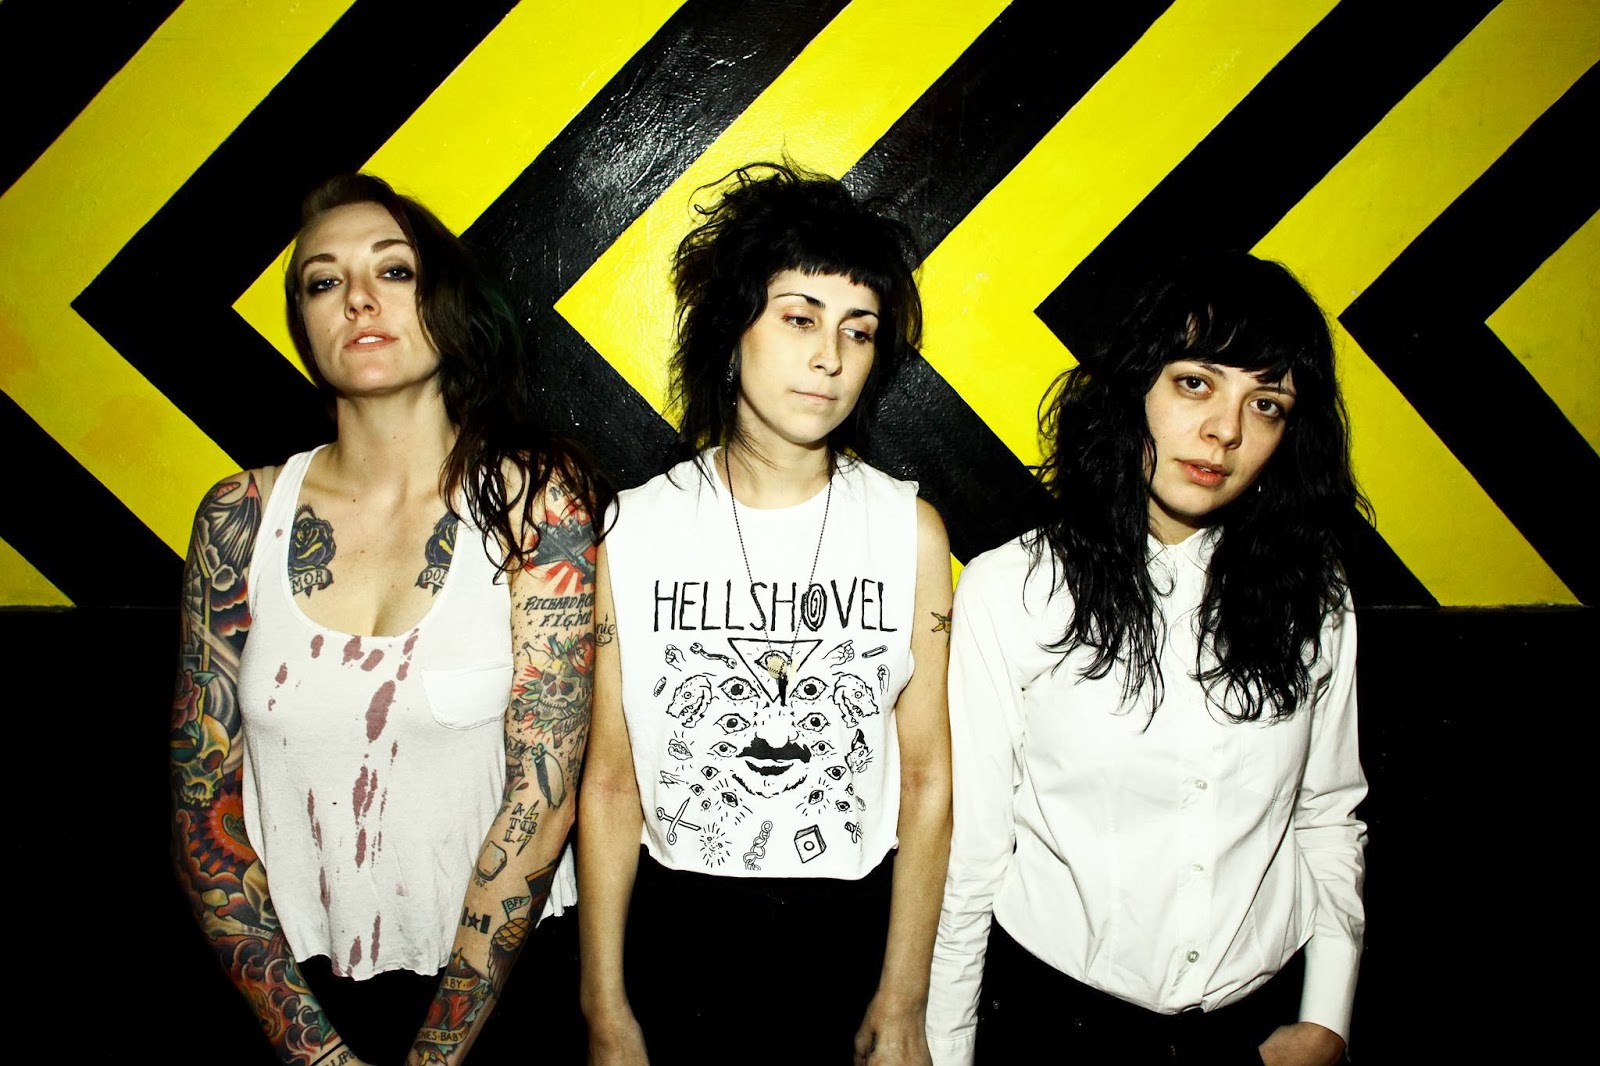 The Coathangers- Bruised Up Punk - "Suck My Shirt" Album drops March 18th